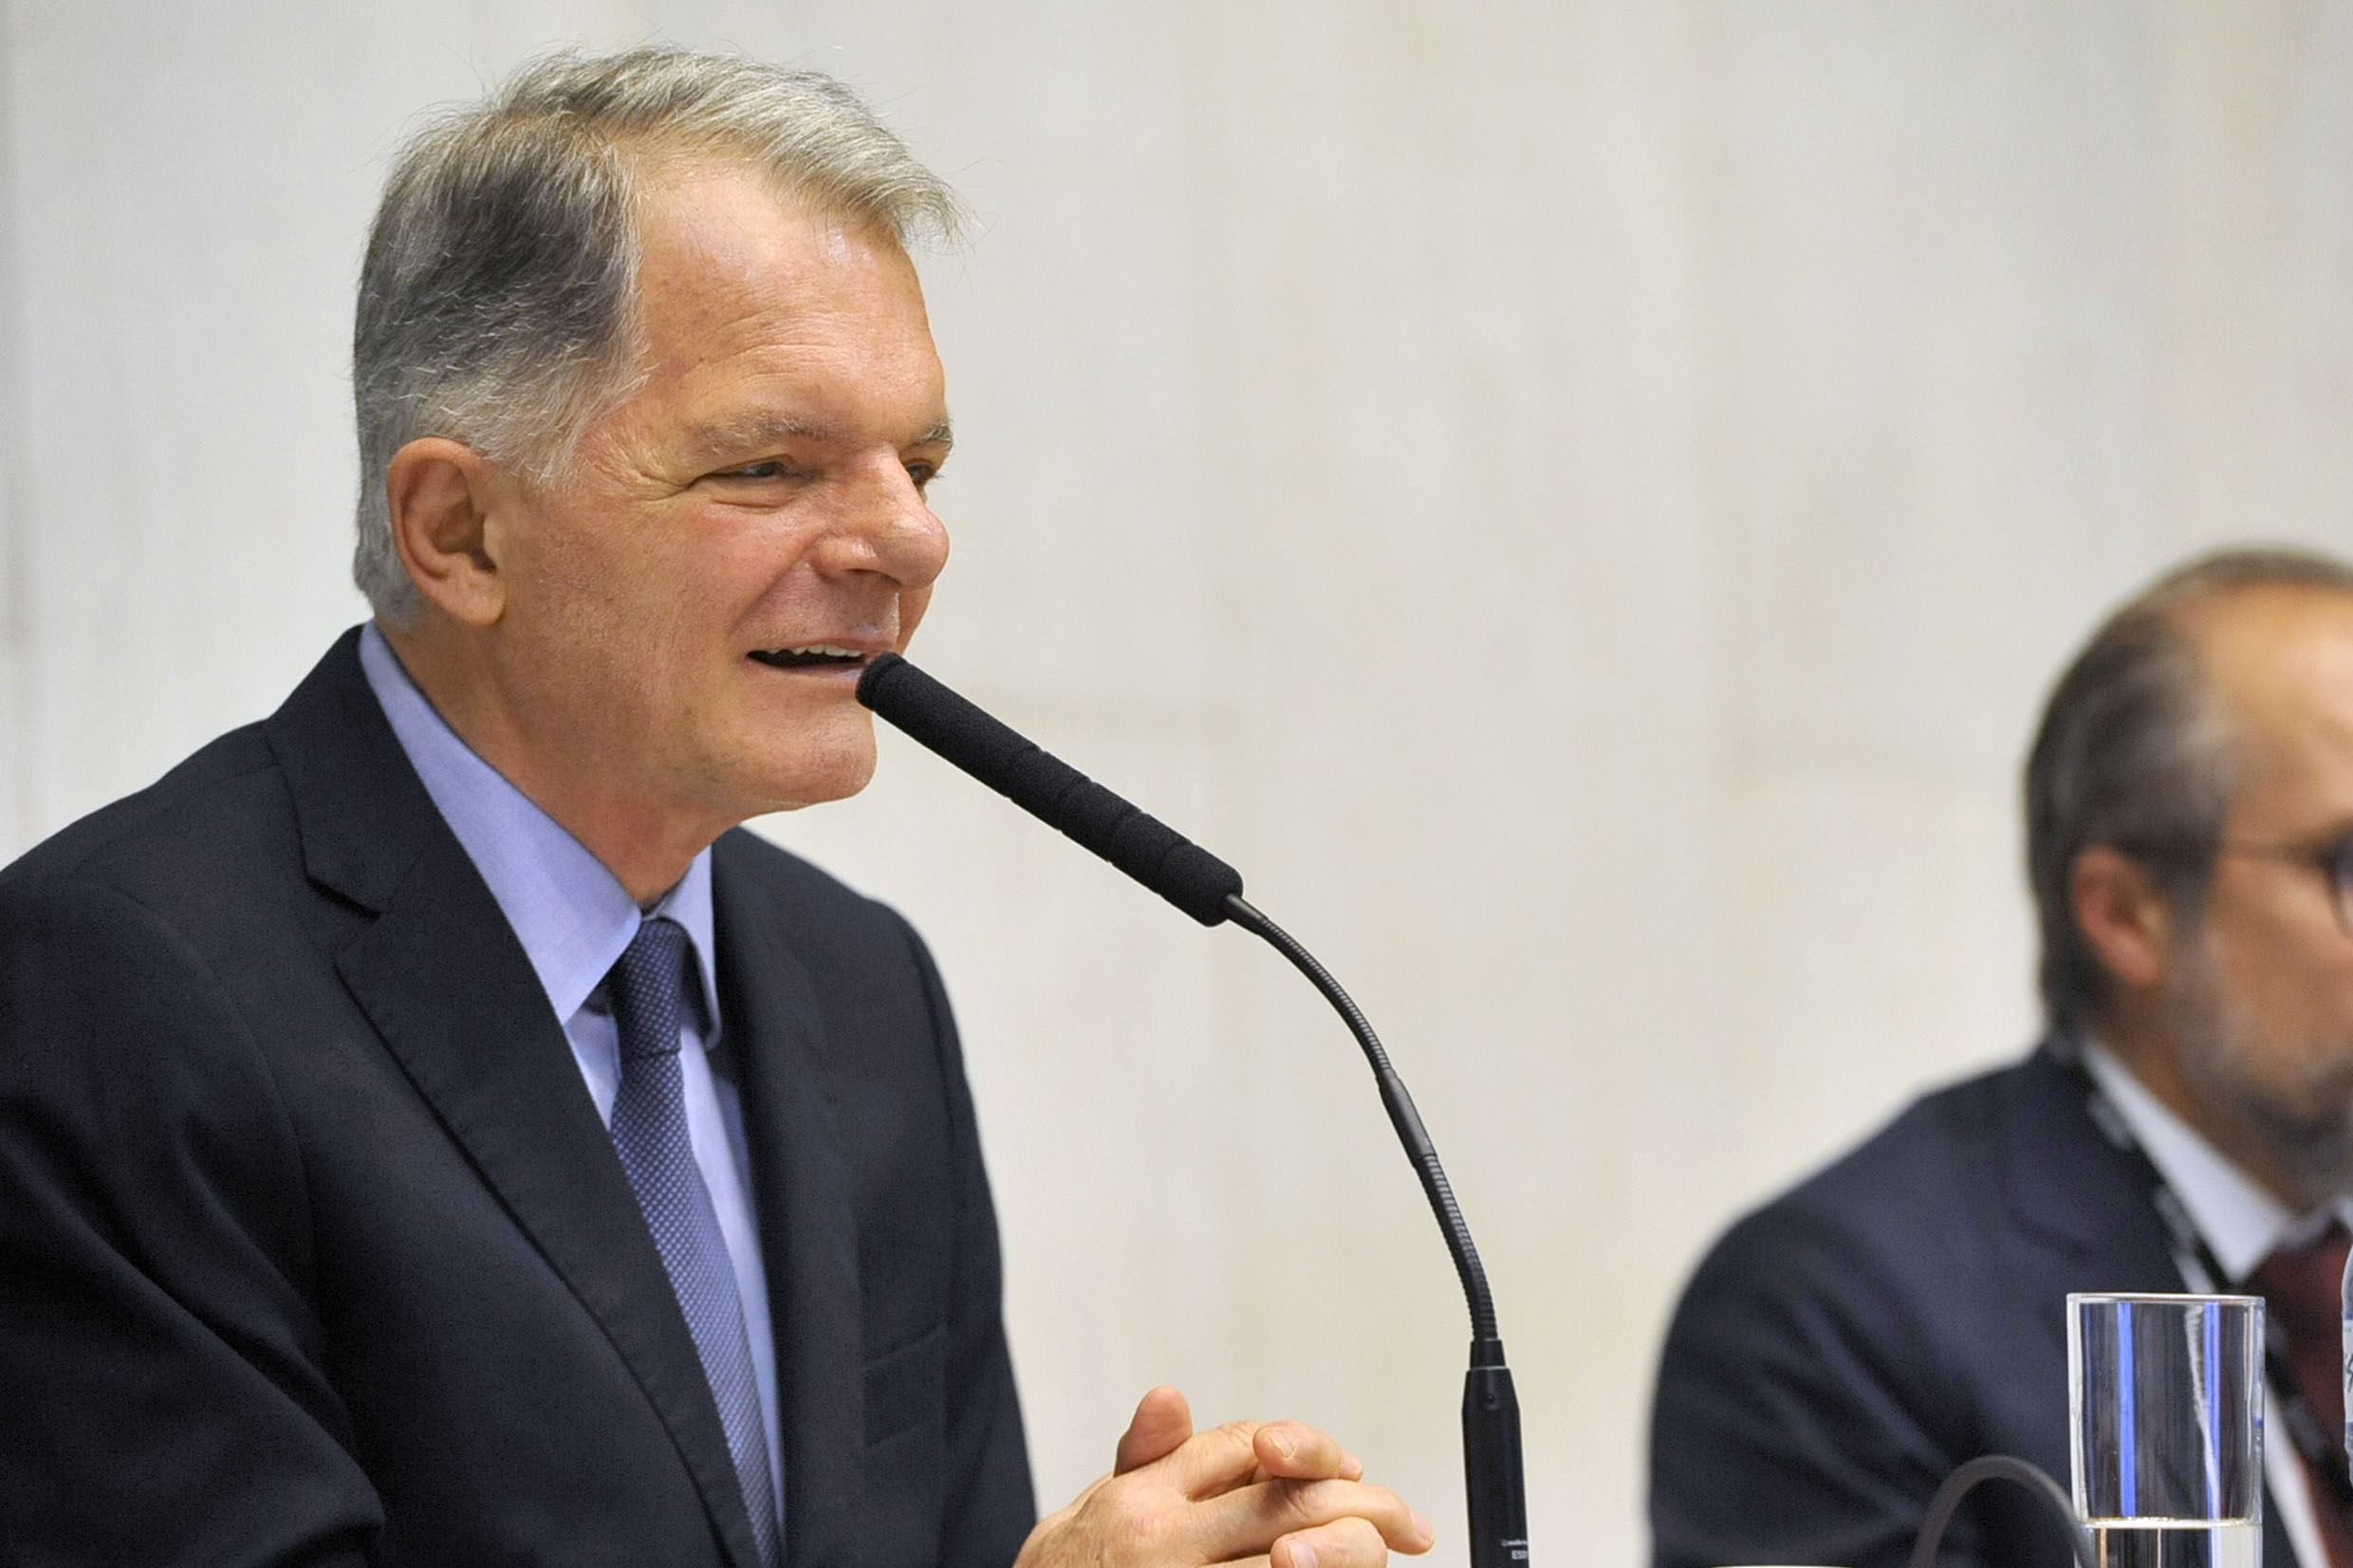 Mauro Bragato preside a comisso<a style='float:right' href='https://www3.al.sp.gov.br/repositorio/noticia/N-03-2020/fg248107.jpg' target=_blank><img src='/_img/material-file-download-white.png' width='14px' alt='Clique para baixar a imagem'></a>